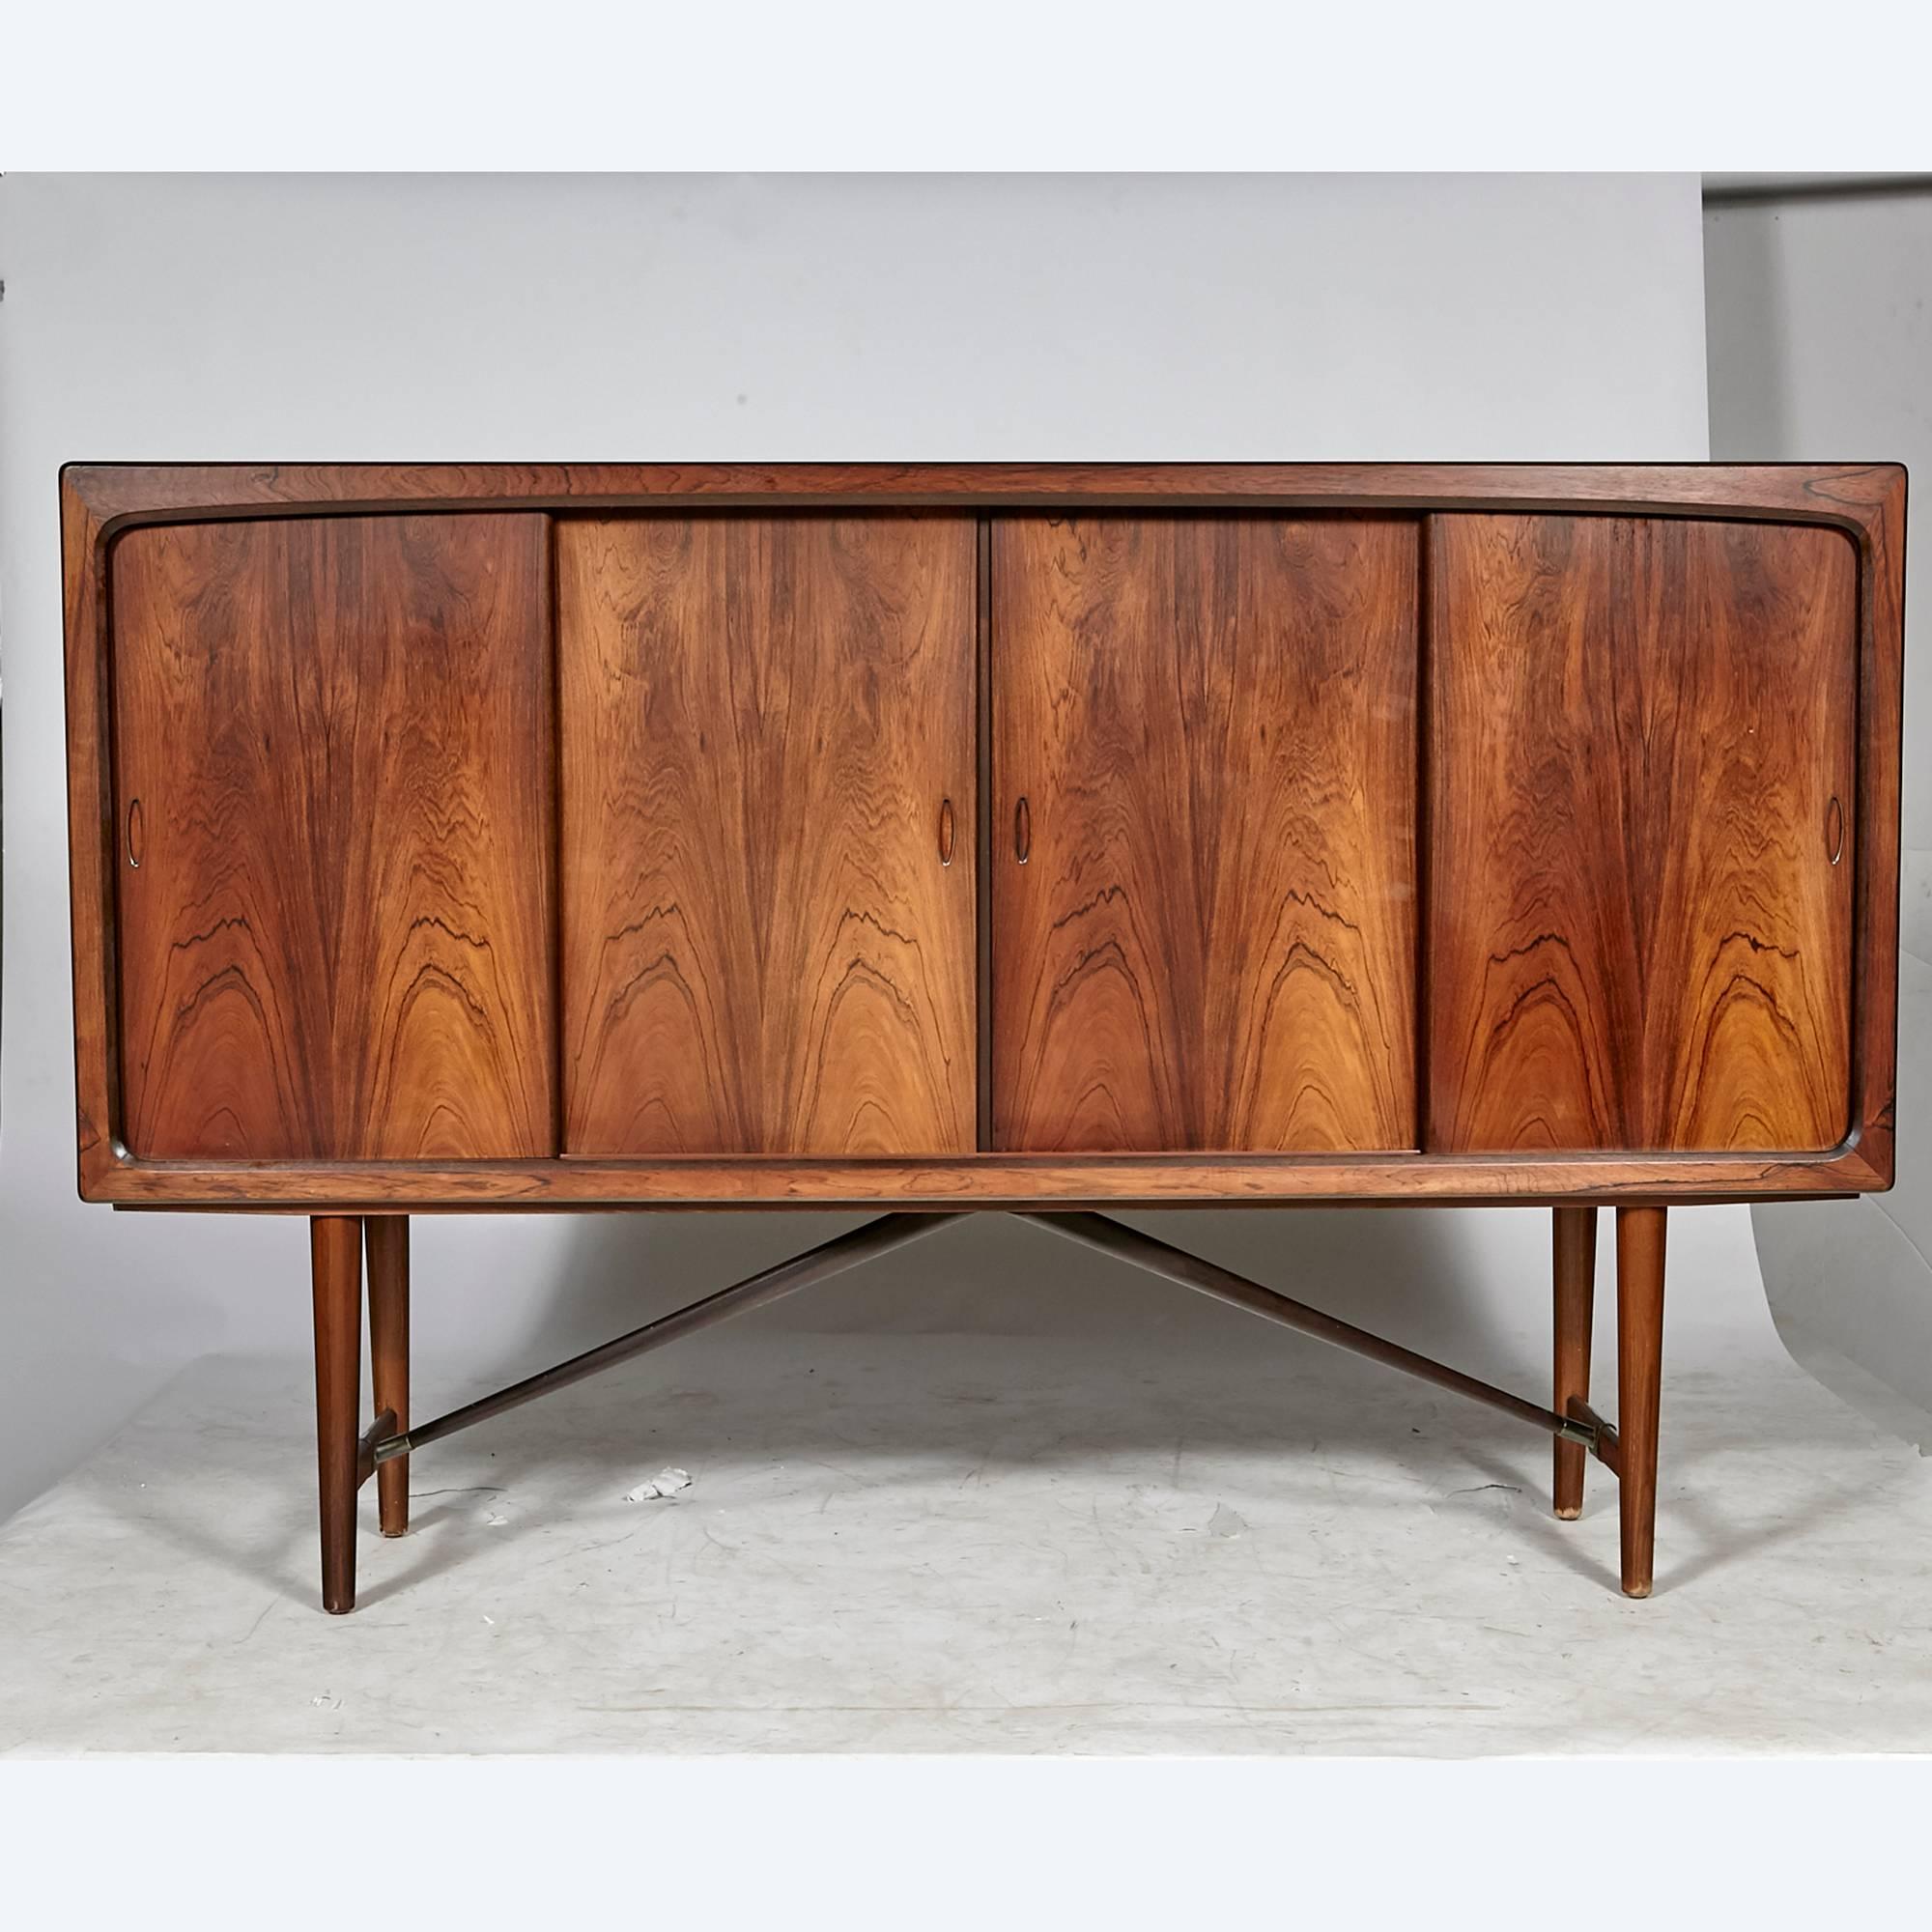 Vintage Scandinavian Modern Danish rosewood sideboard by A. L. Johansen & Søn in Kolding Denmark, circa 1960s. Interior has adjustable shelves, flat drawers for storage and a small mirrored back dry bar area. Base has a cross stretcher for support.